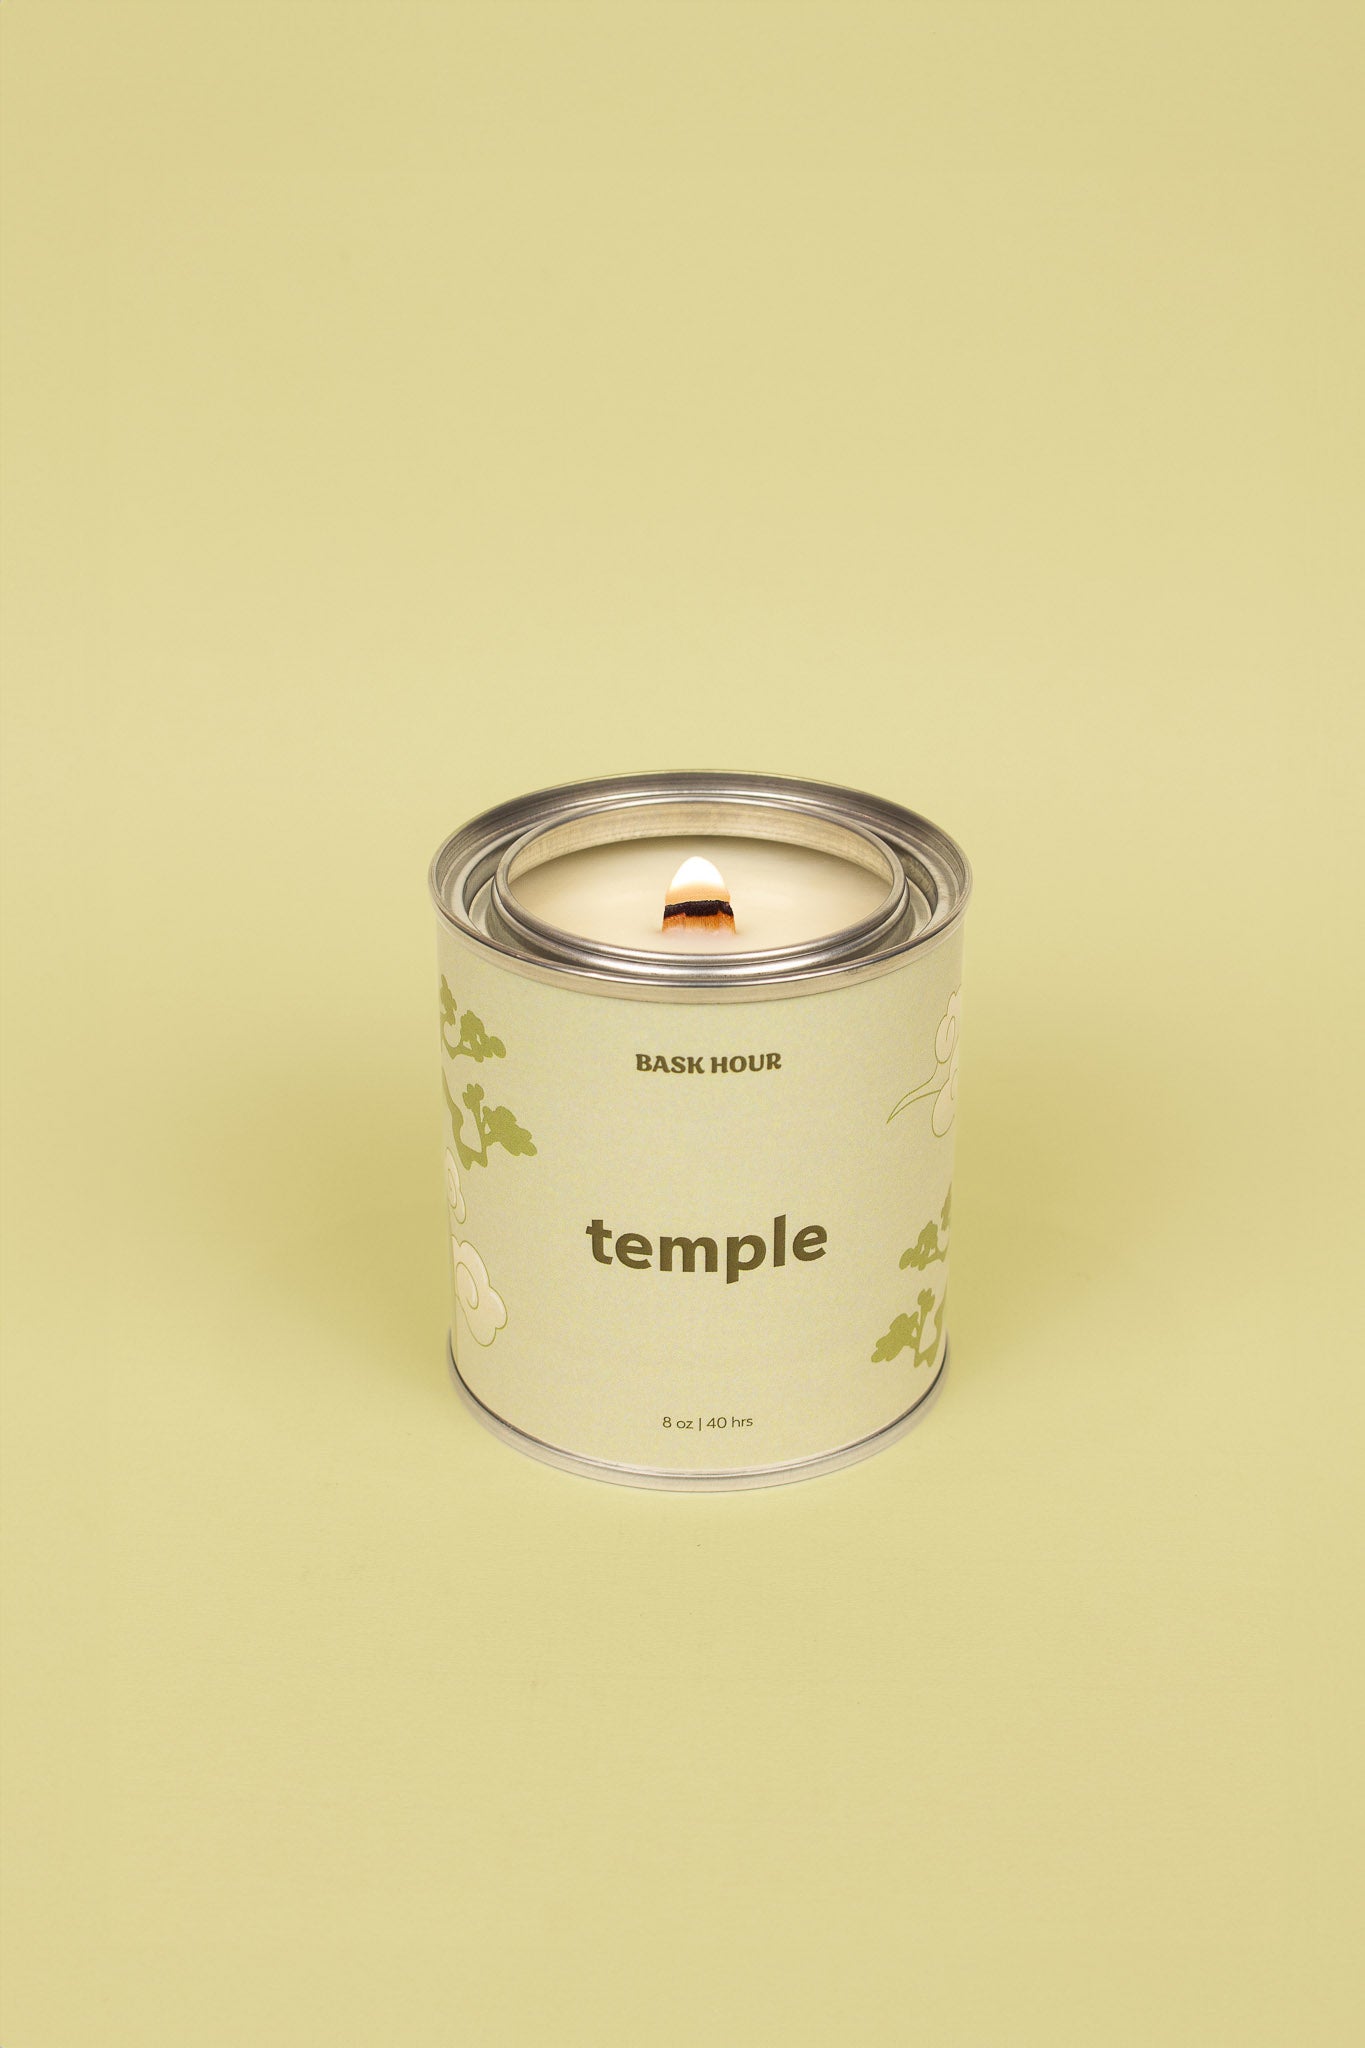 Our Temple inspired candle has a perfect aromatic blend of earthy sweetness and spiritual warmness—a great way to set your space with a calming essence and invite positive energy into your celebrations.